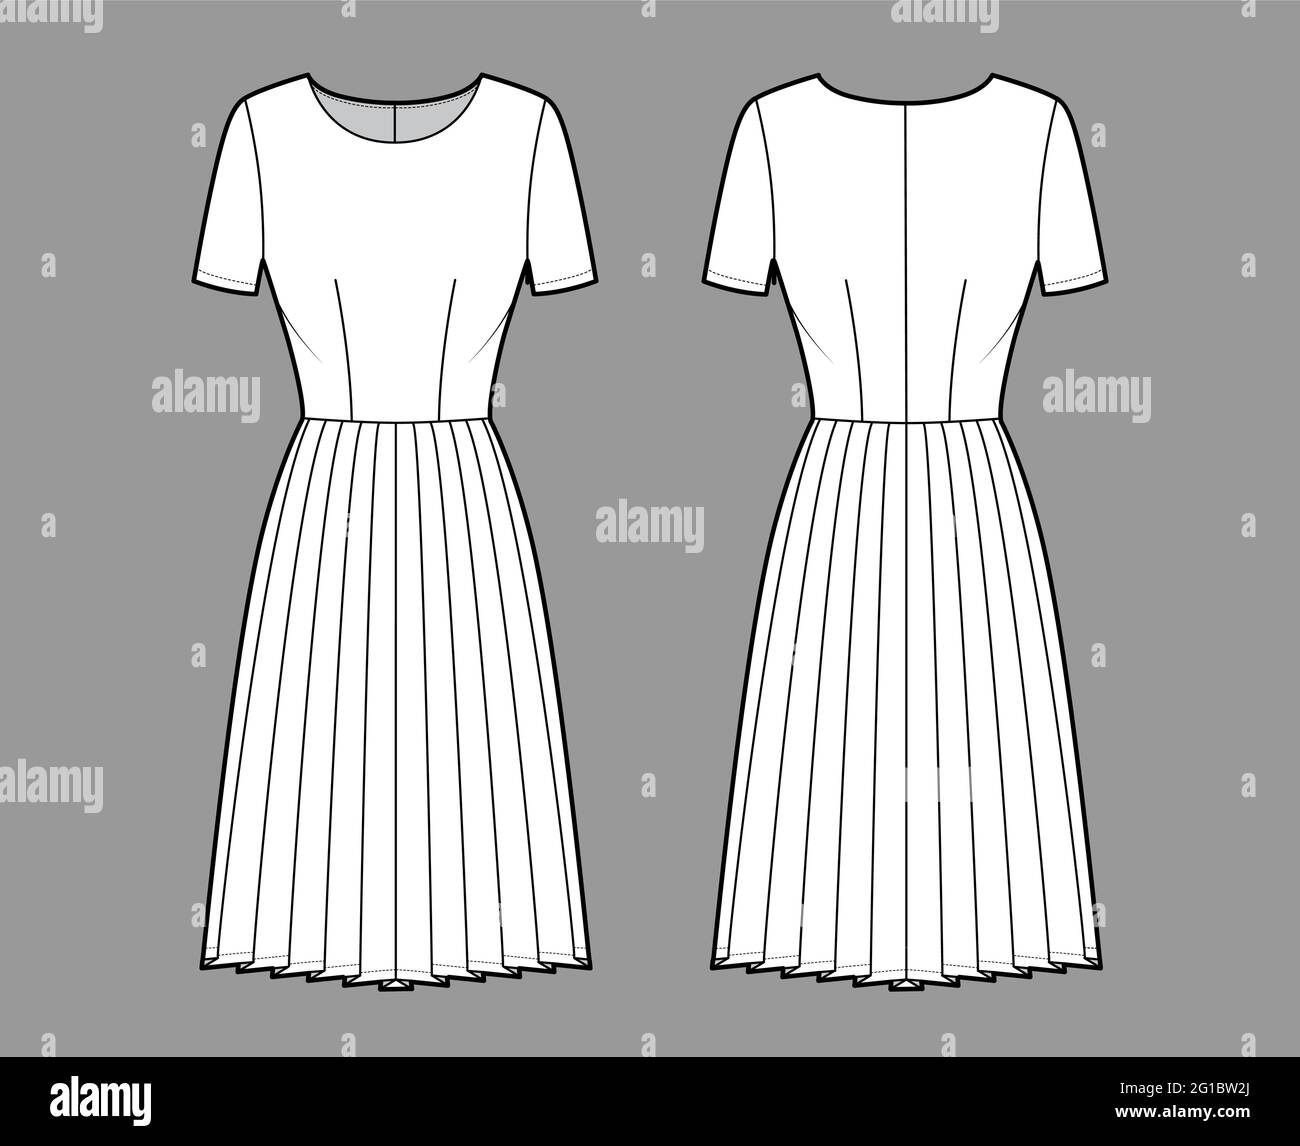 Pleated short skirt Stock Vector Images - Alamy